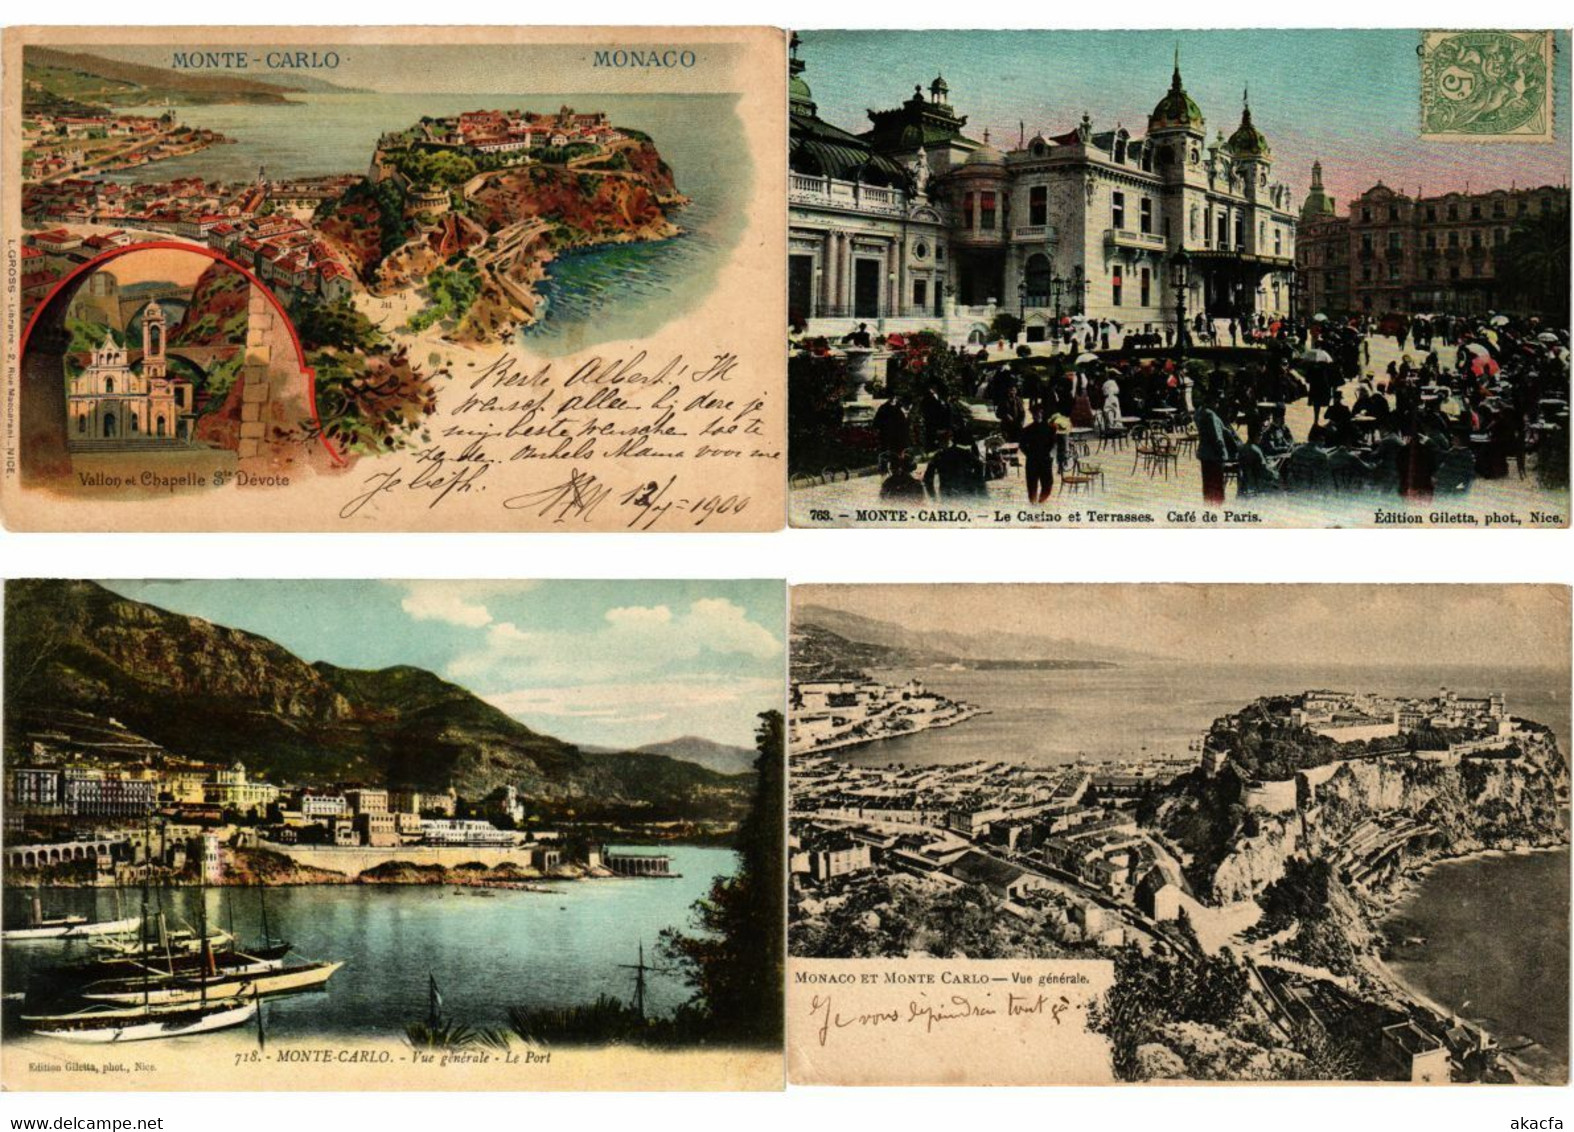 MONACO 1000 Vintage Postcards Mostly Pre-1950 with BETTER (L2766)